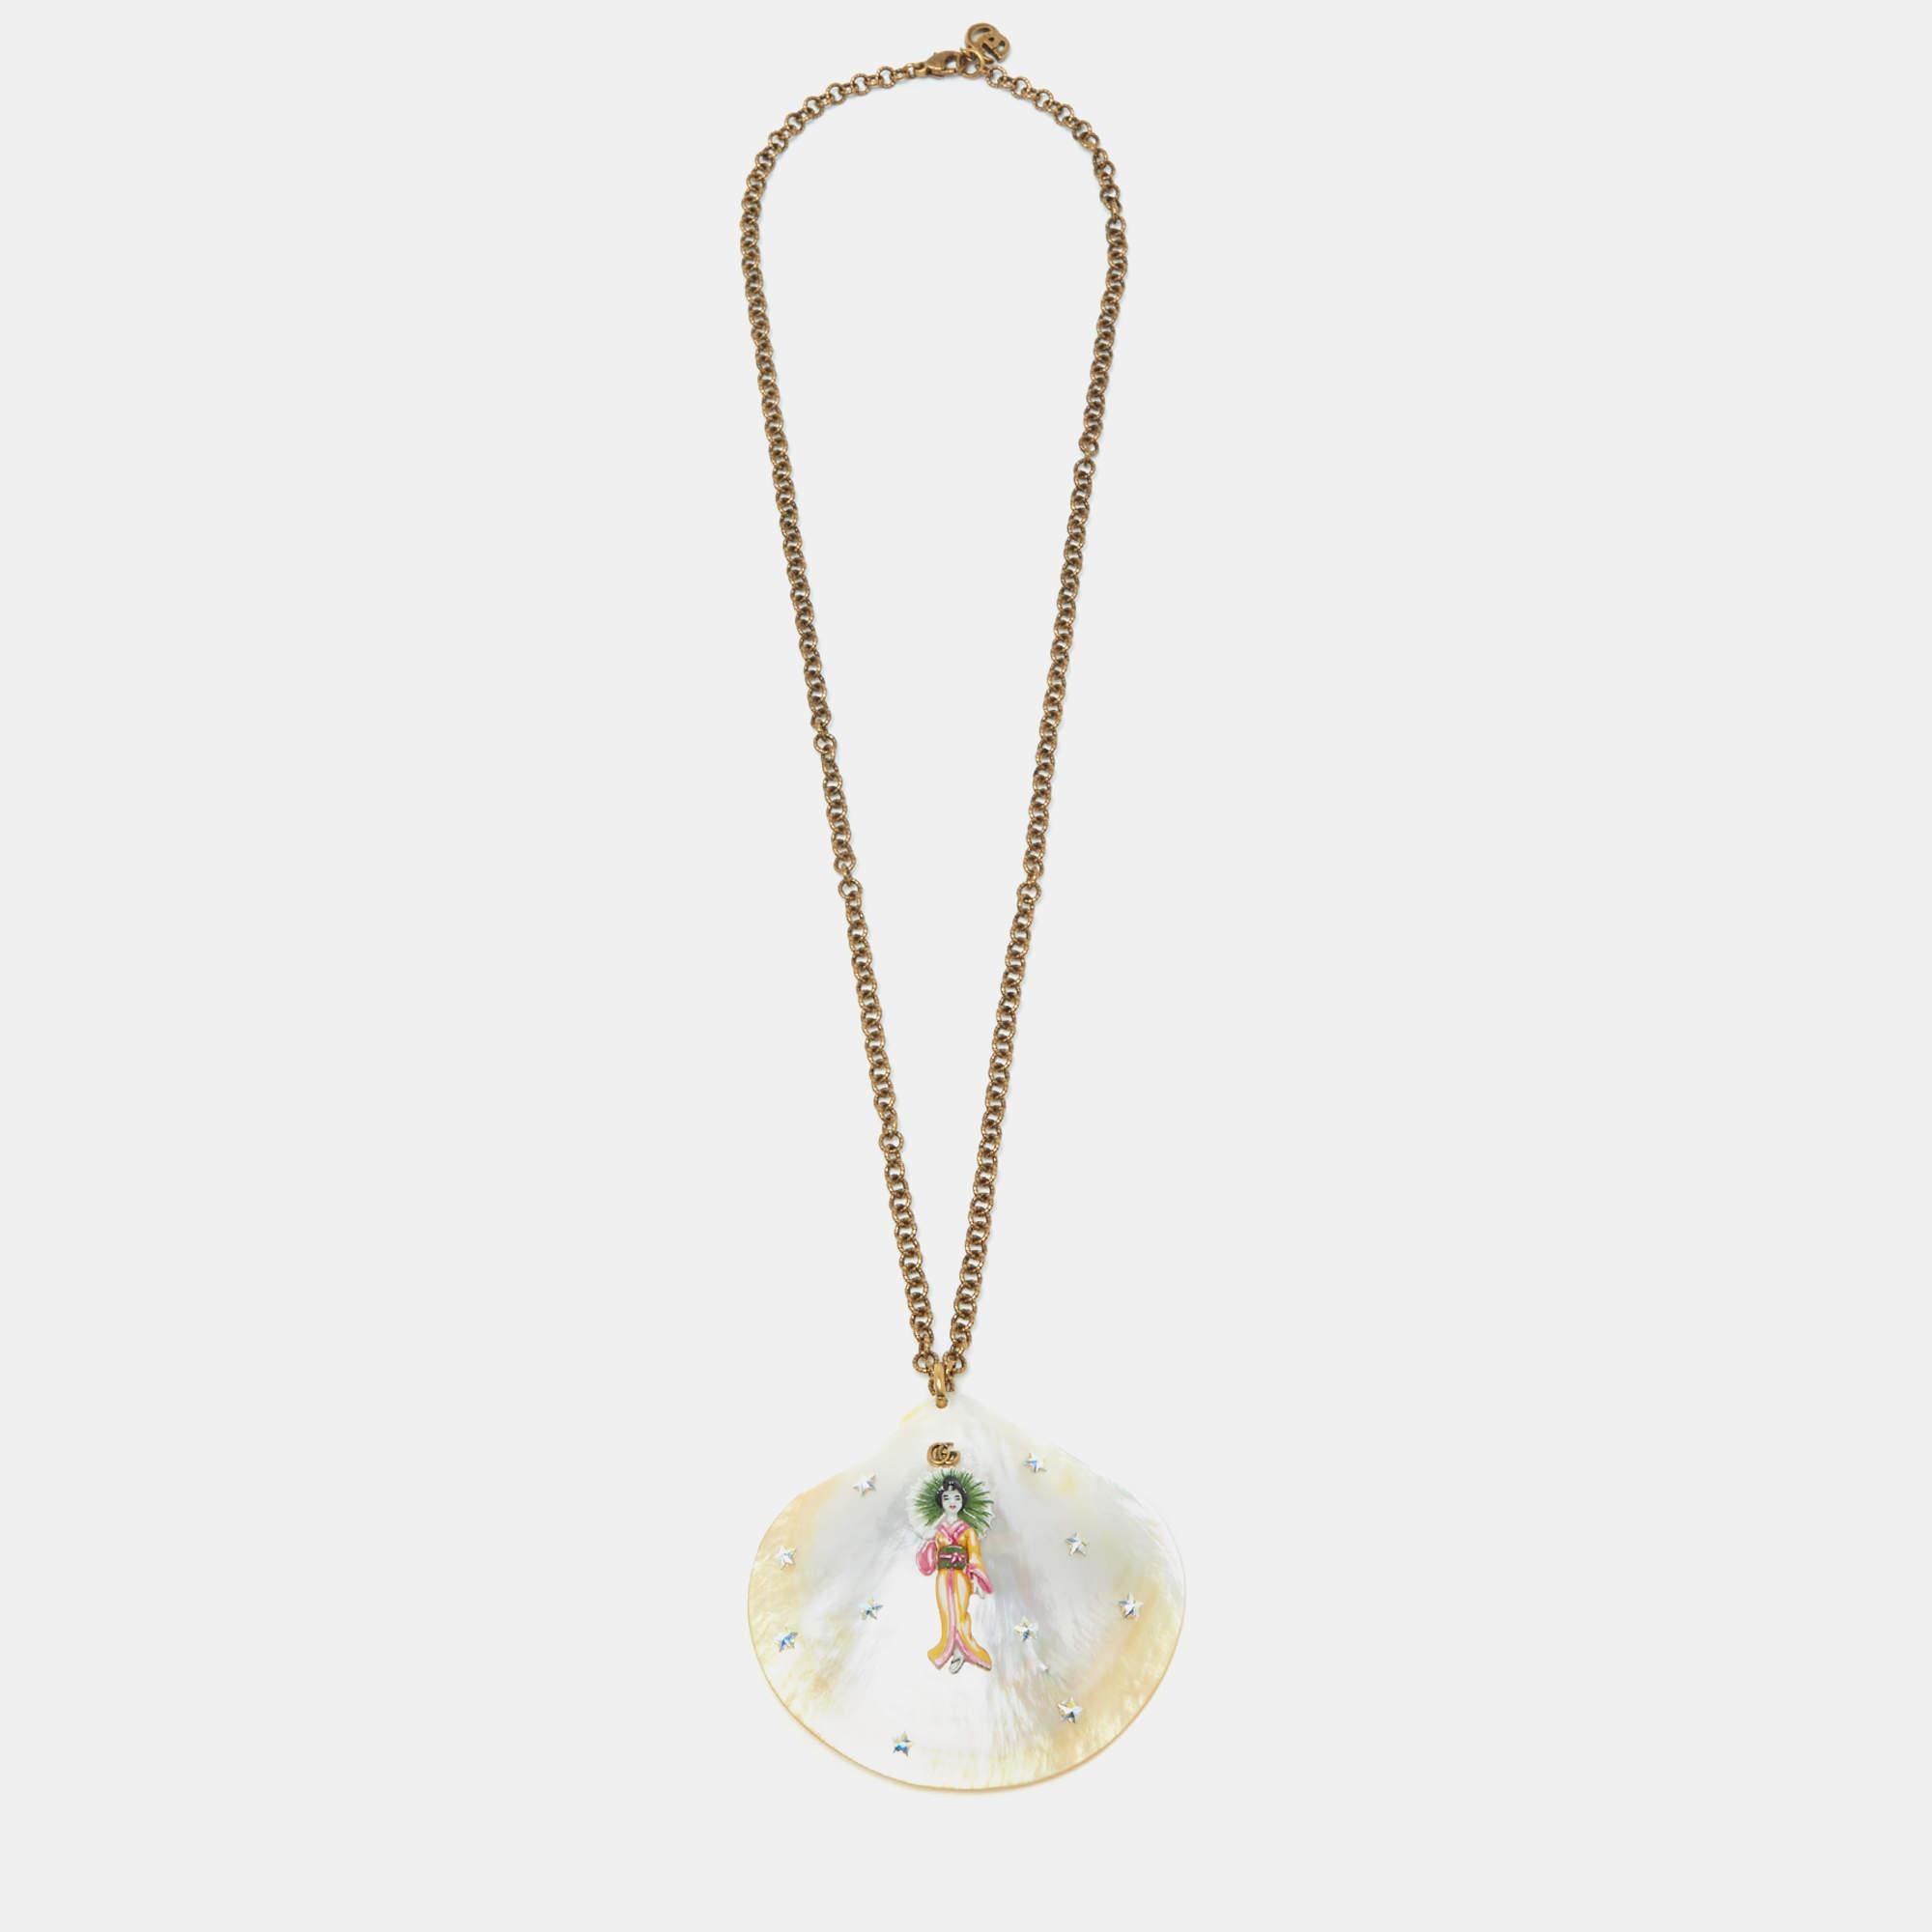 A shell design in mother of pearl, with the detailing of stars, the GG logo, and a Kimon-clad lady is the pendant of this Gucci necklace. A gold-tone chain completes it.

Includes: Original Dustbag, Original Box, Info Booklets

